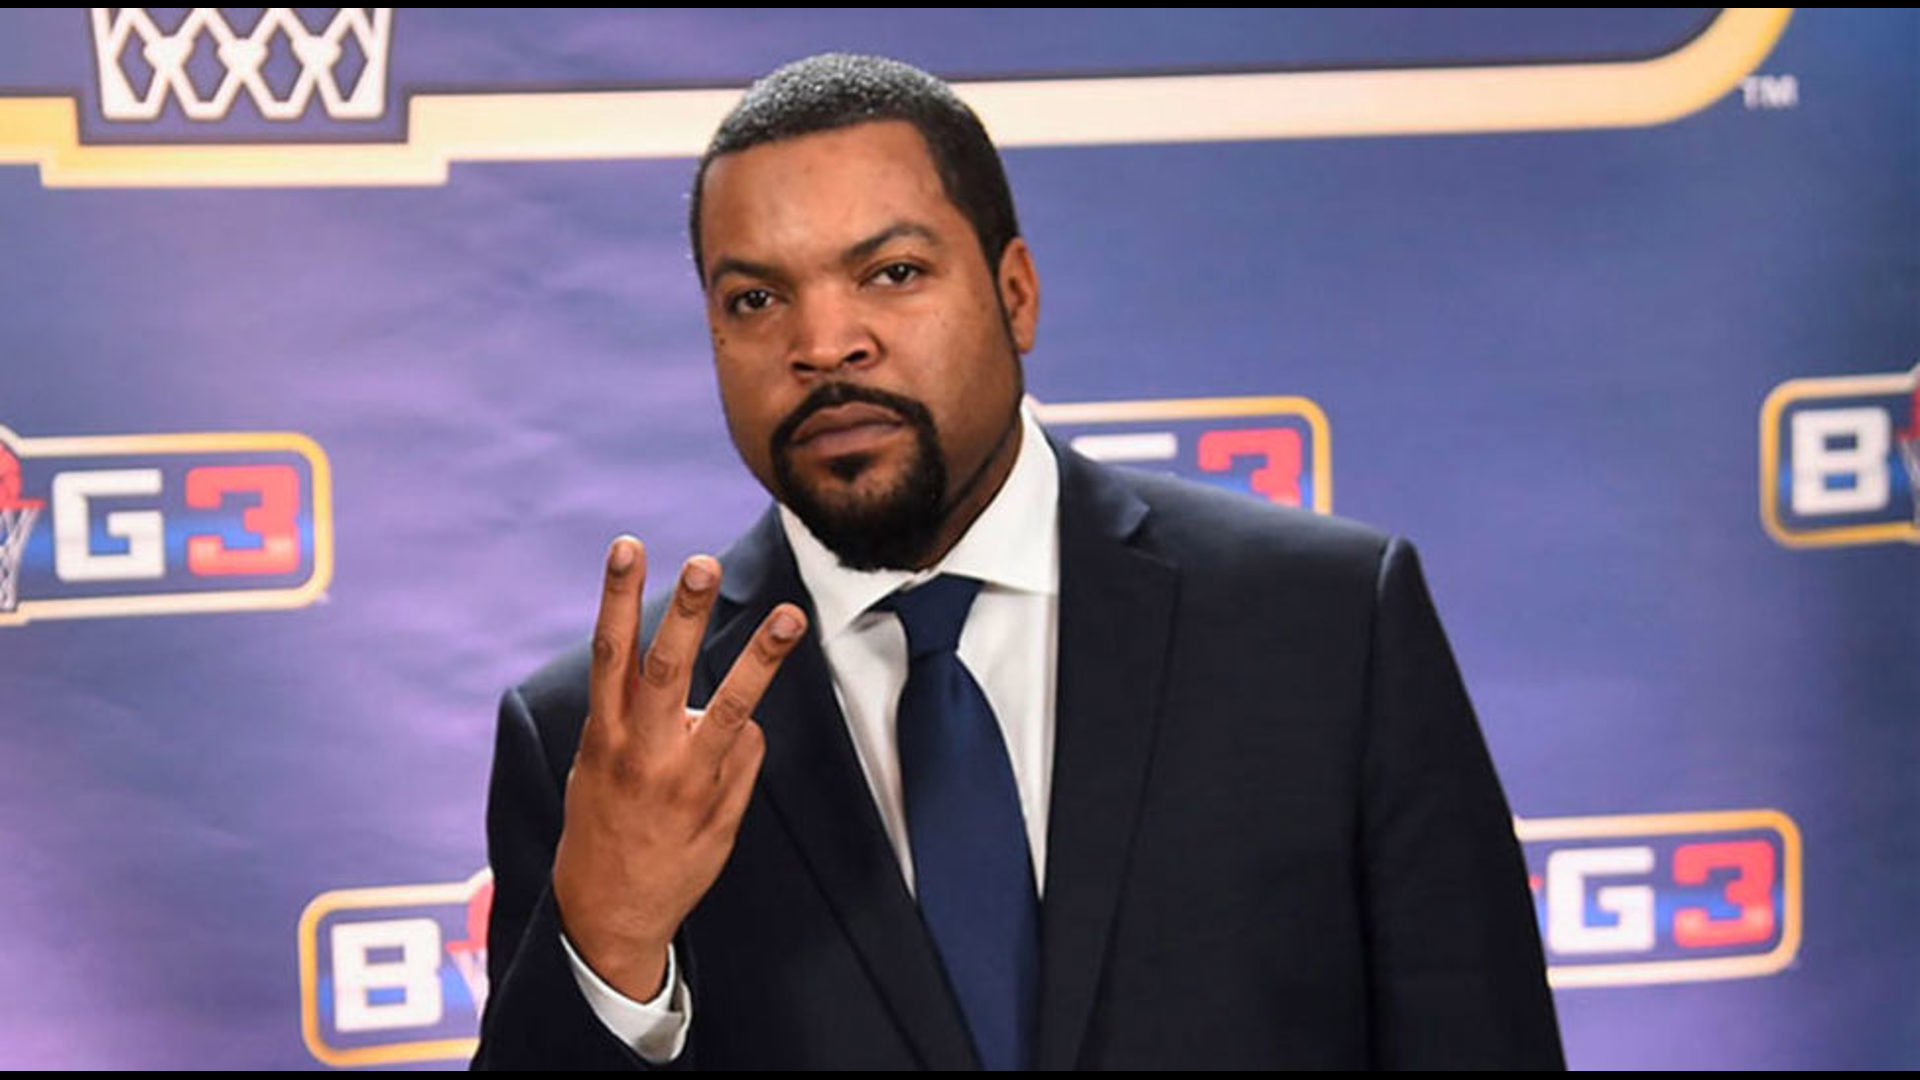 Ice Cube & Jeff Kwatinetz discuss what to expect in the 7th season of BIG3 and Ice Cube's thought process behind offering Caitlin Clark a contract in the league.